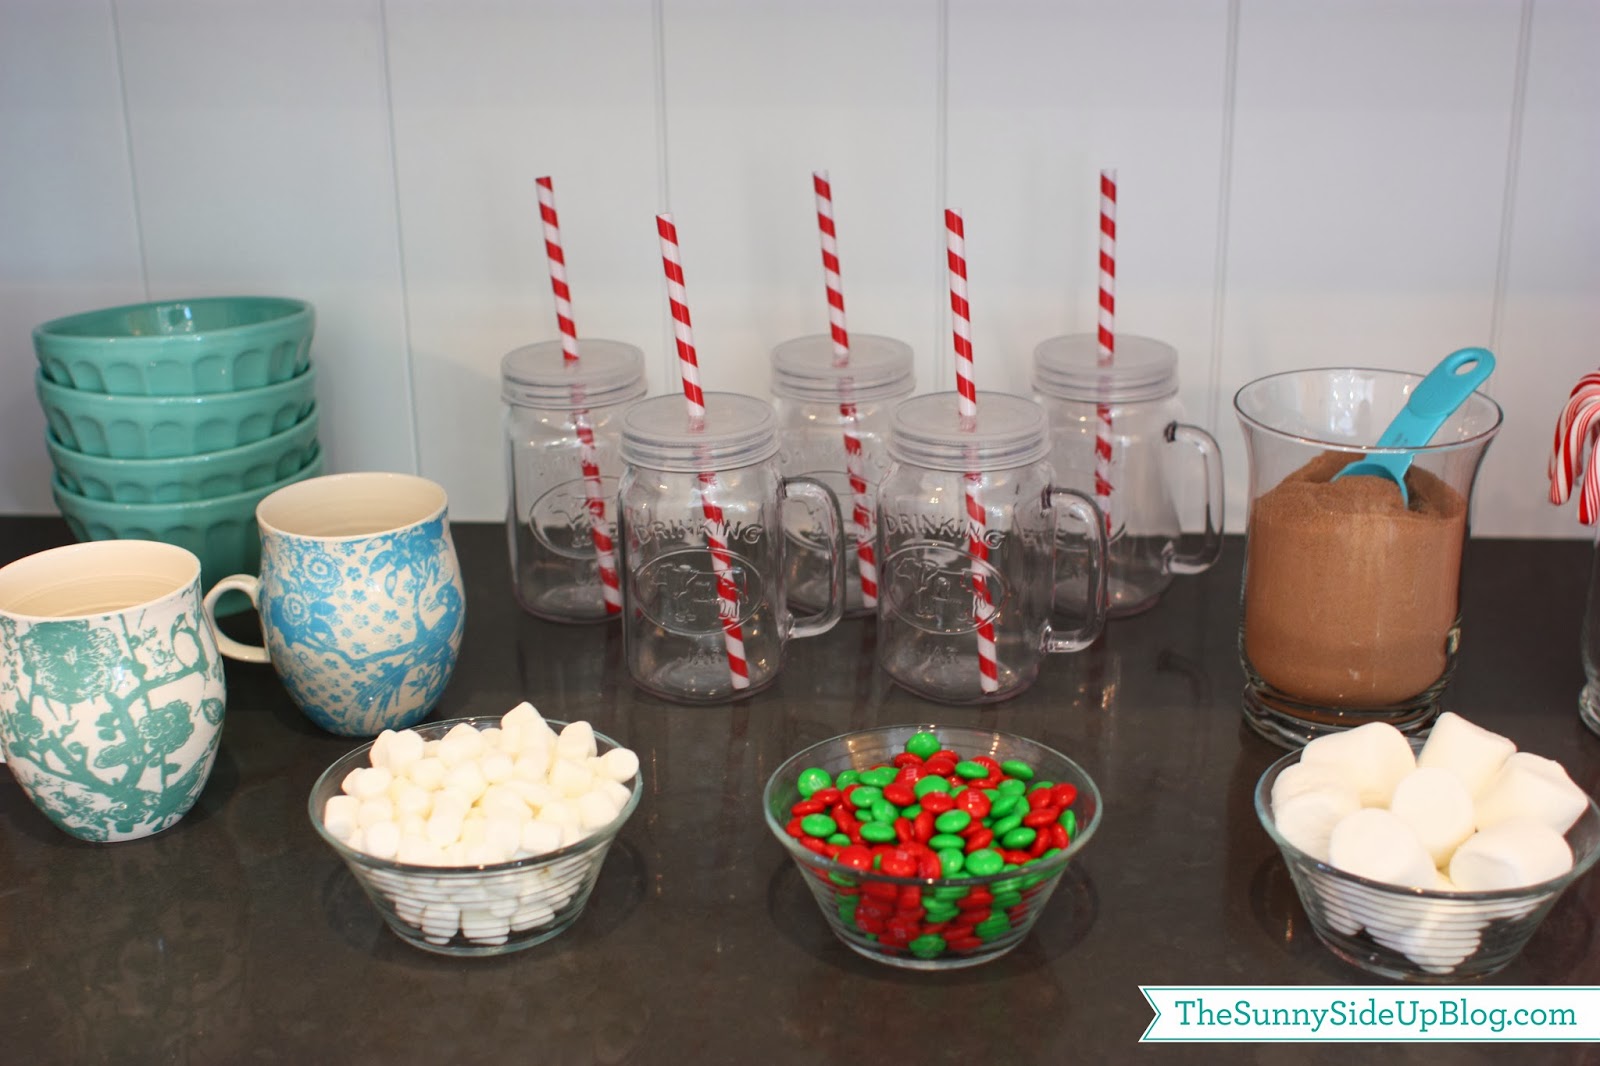 Hot Chocolate Station - The Sunny Side Up Blog